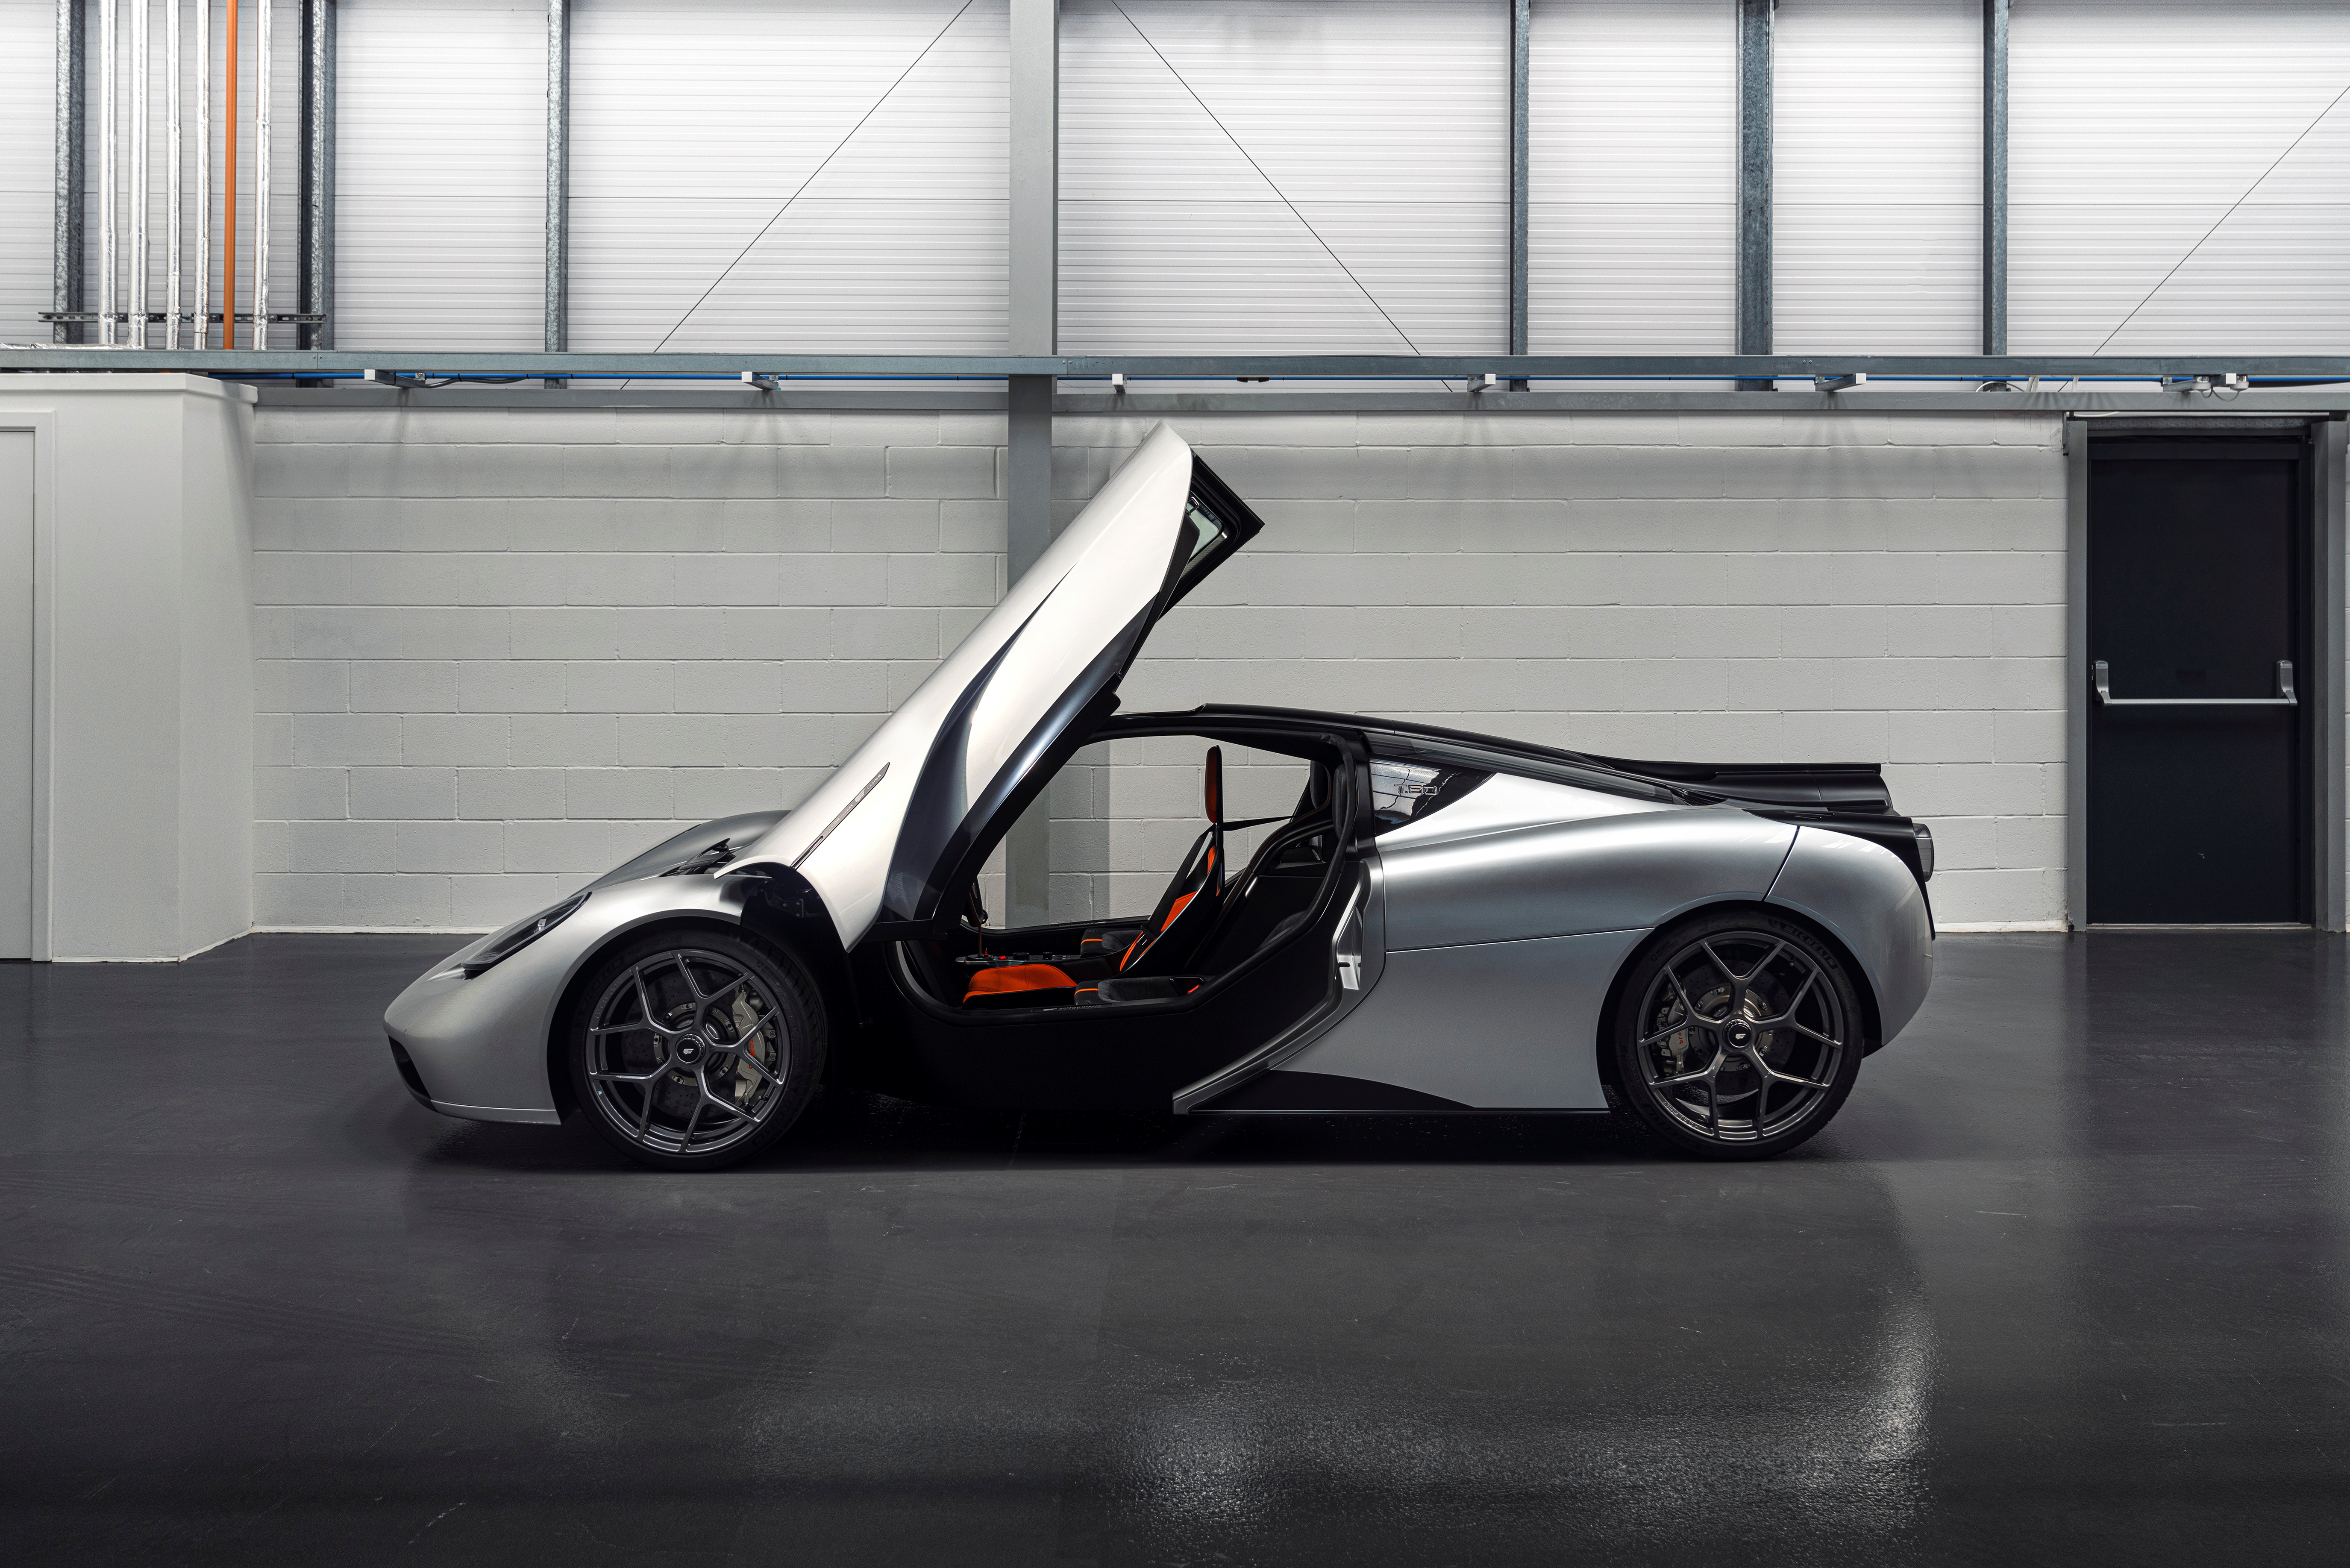 An undated handout photo of the Gordon Murray Group's T50 supercar